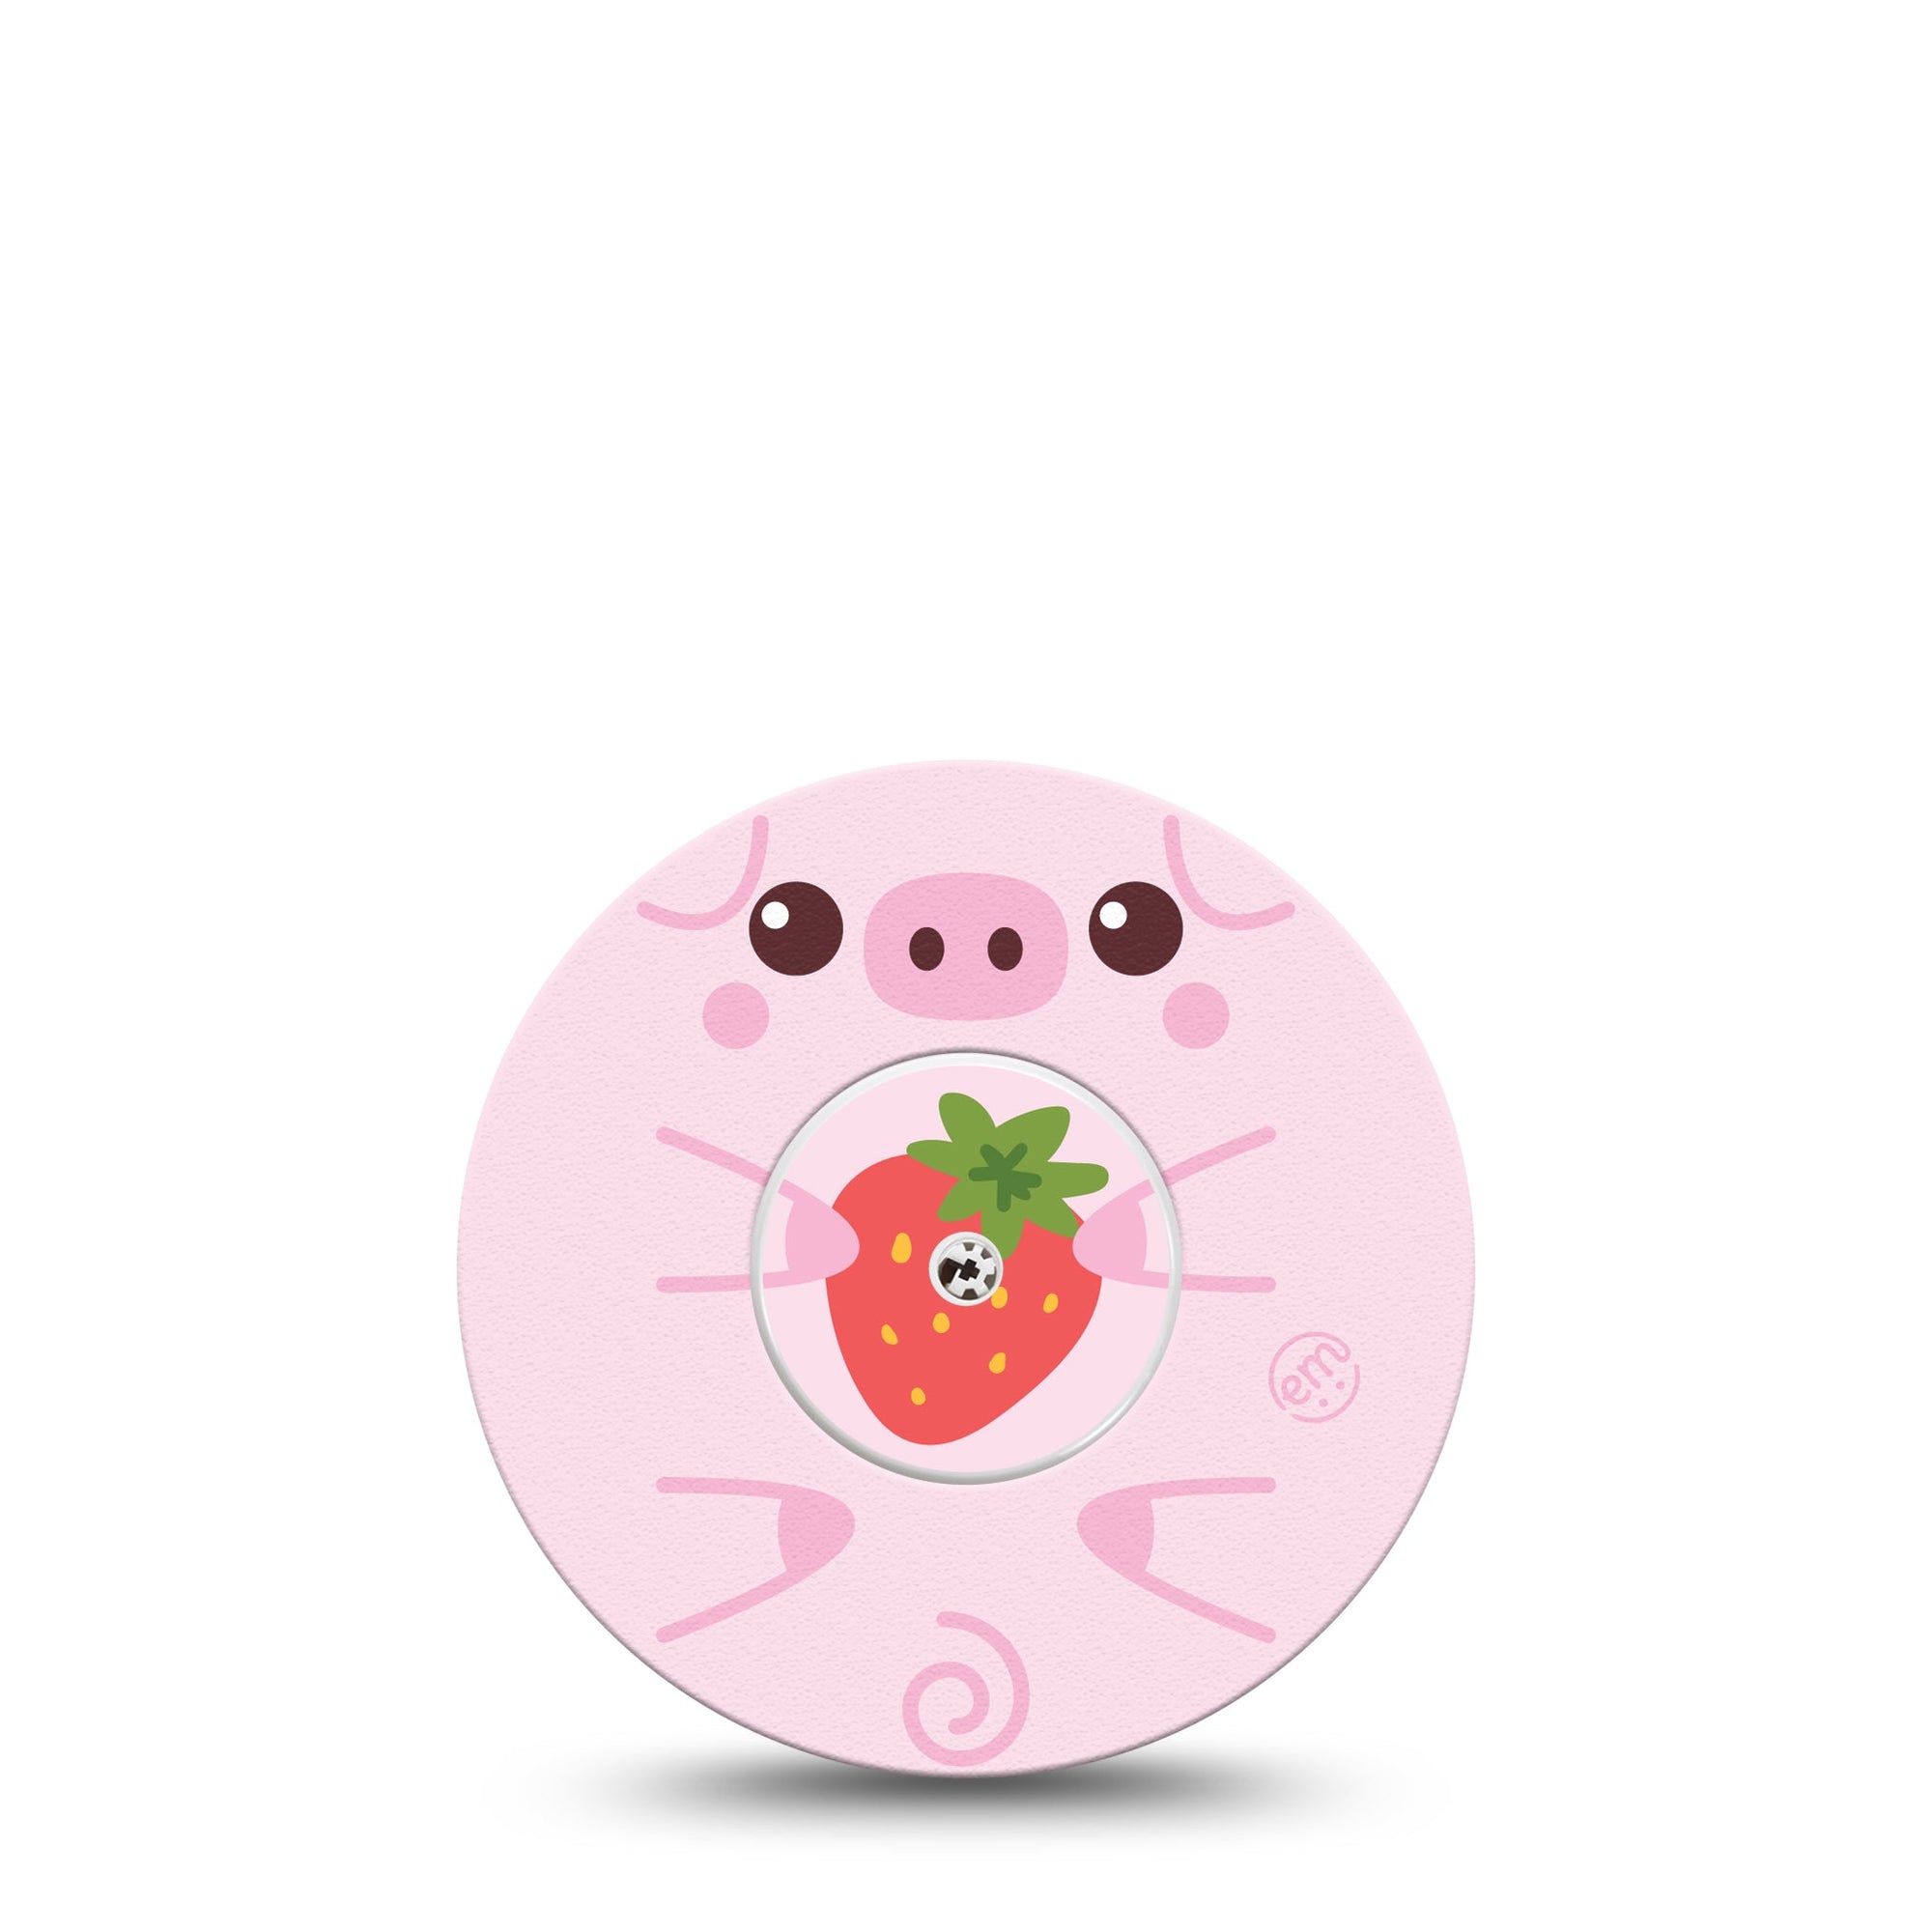 ExpressionMed Strawberry Piglet Freestyle Libre Sticker and Tape piglet treats Adhesive STticker and Tape Design Continuous Glucose Monitor Design, Abbott Lingo